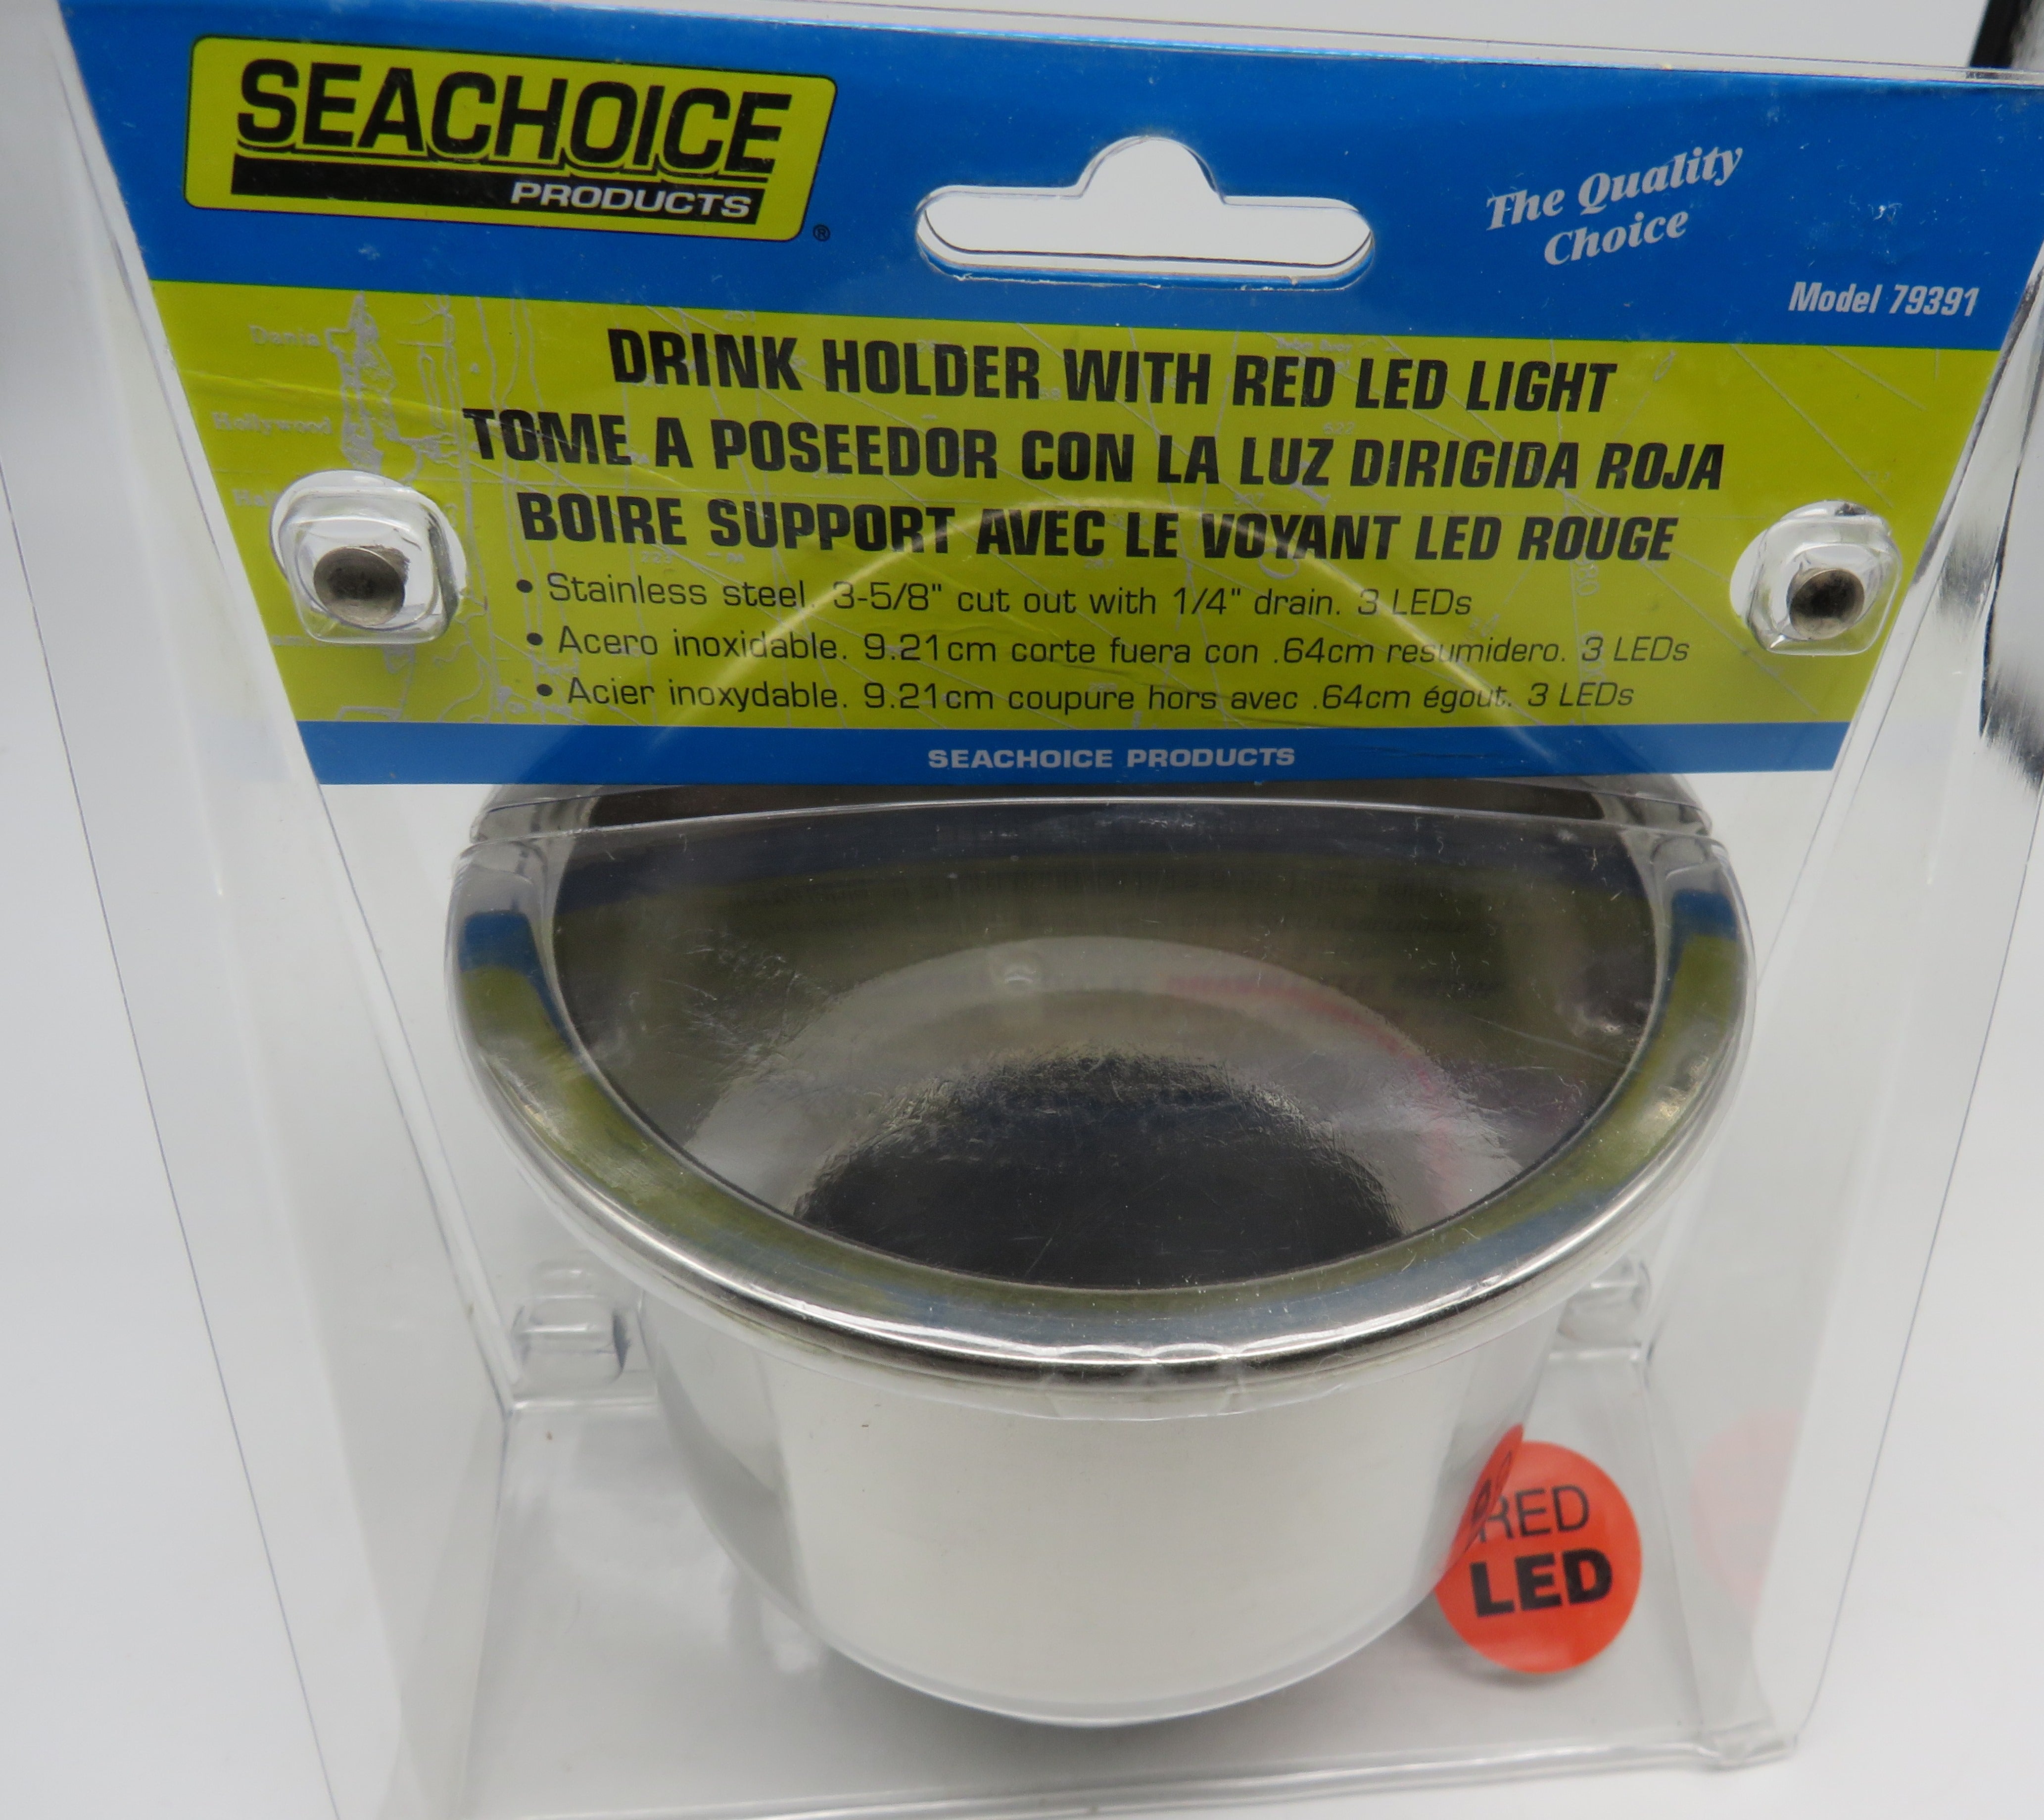 Seachoice Drink Holder With RED LED Light Model 79391